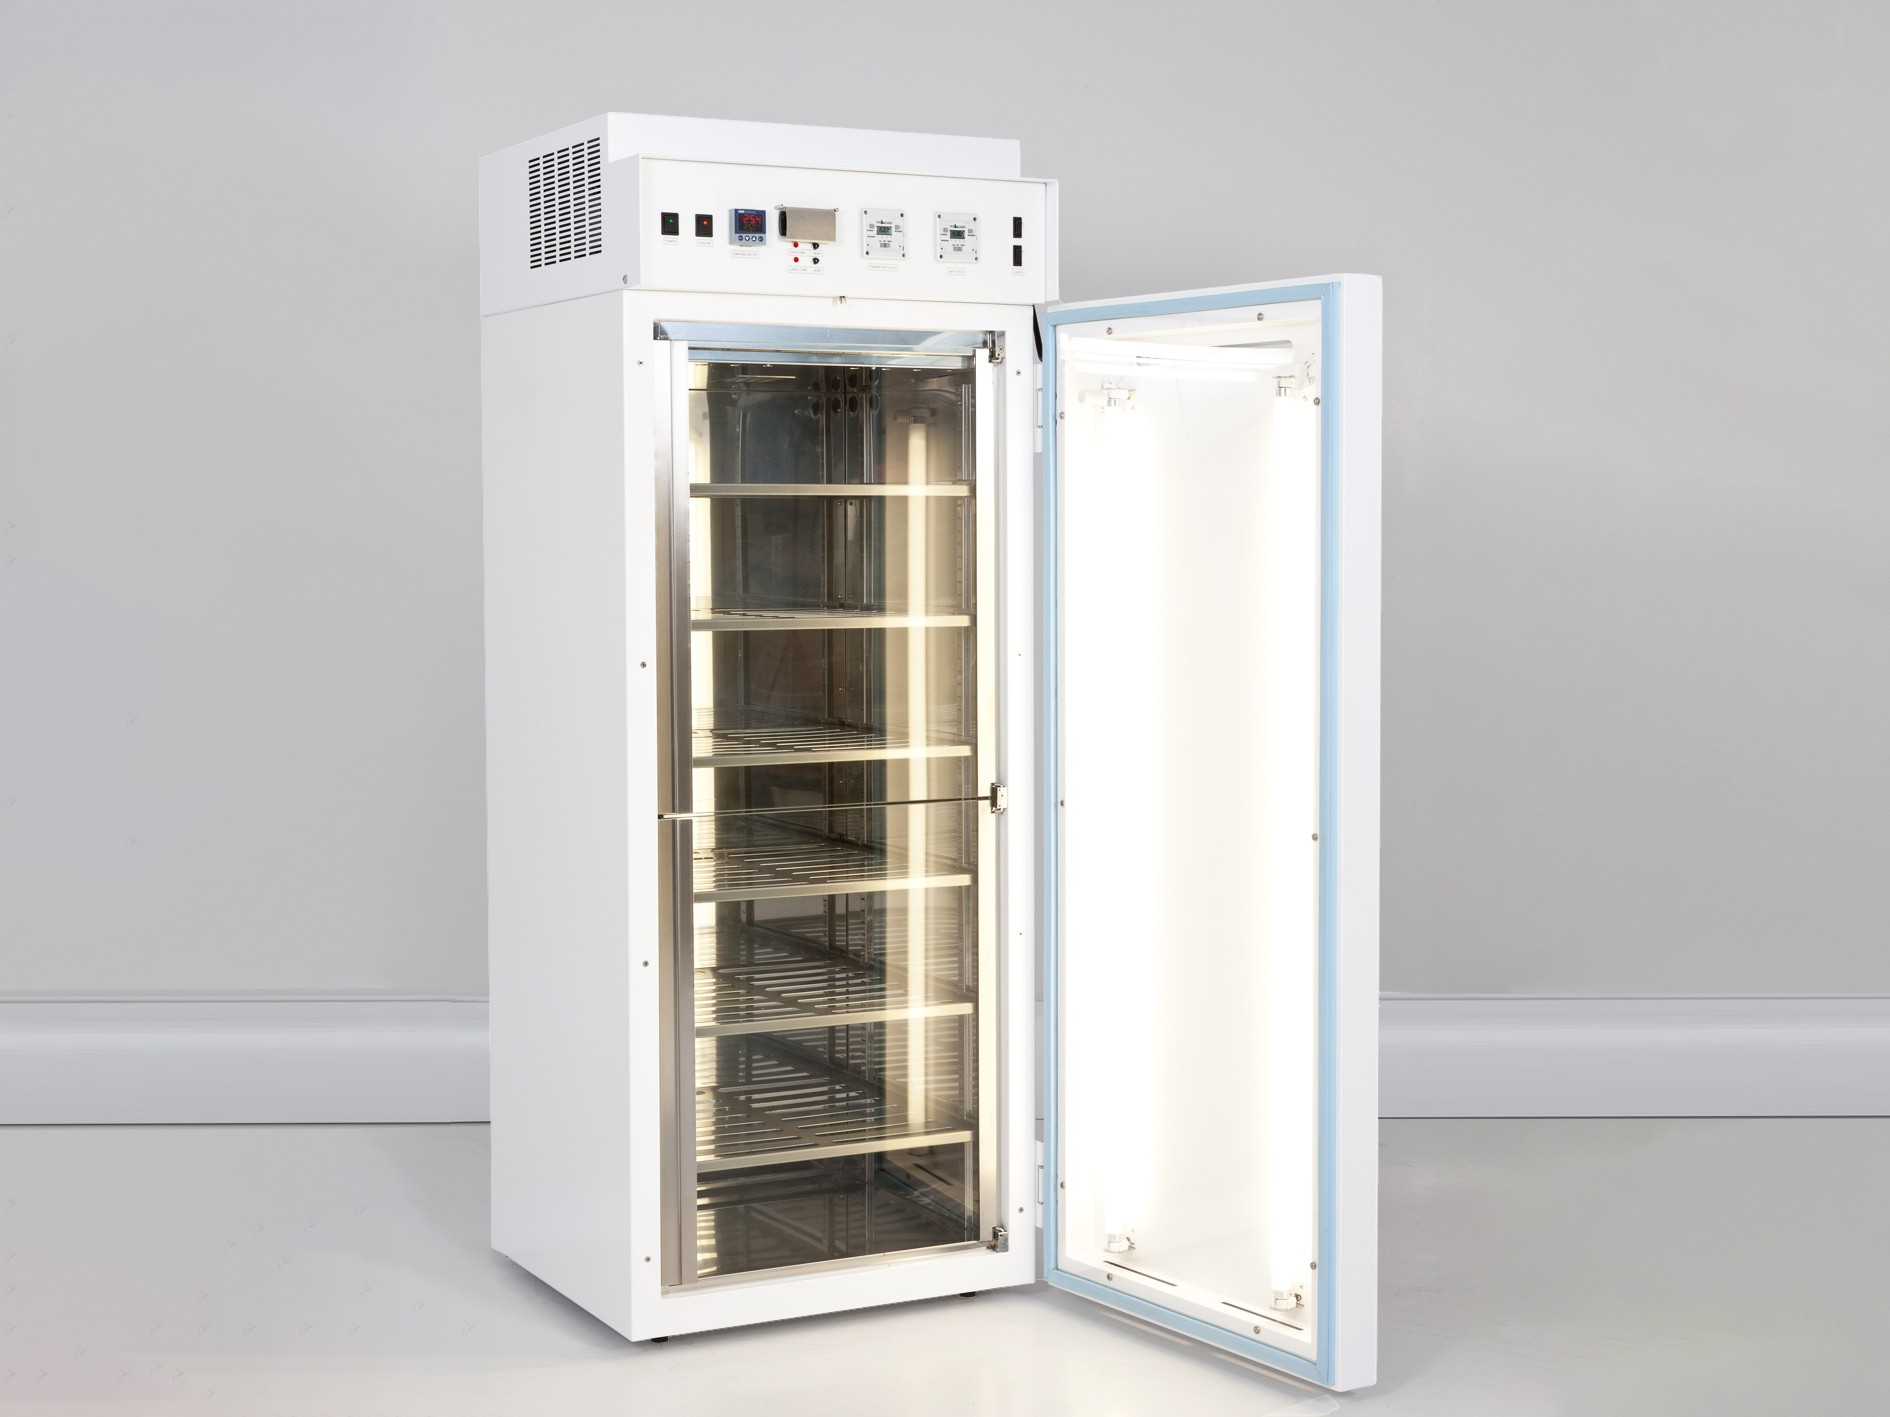 LEEC Fan Assisted Plant Growth and Seed Germination Cabinets